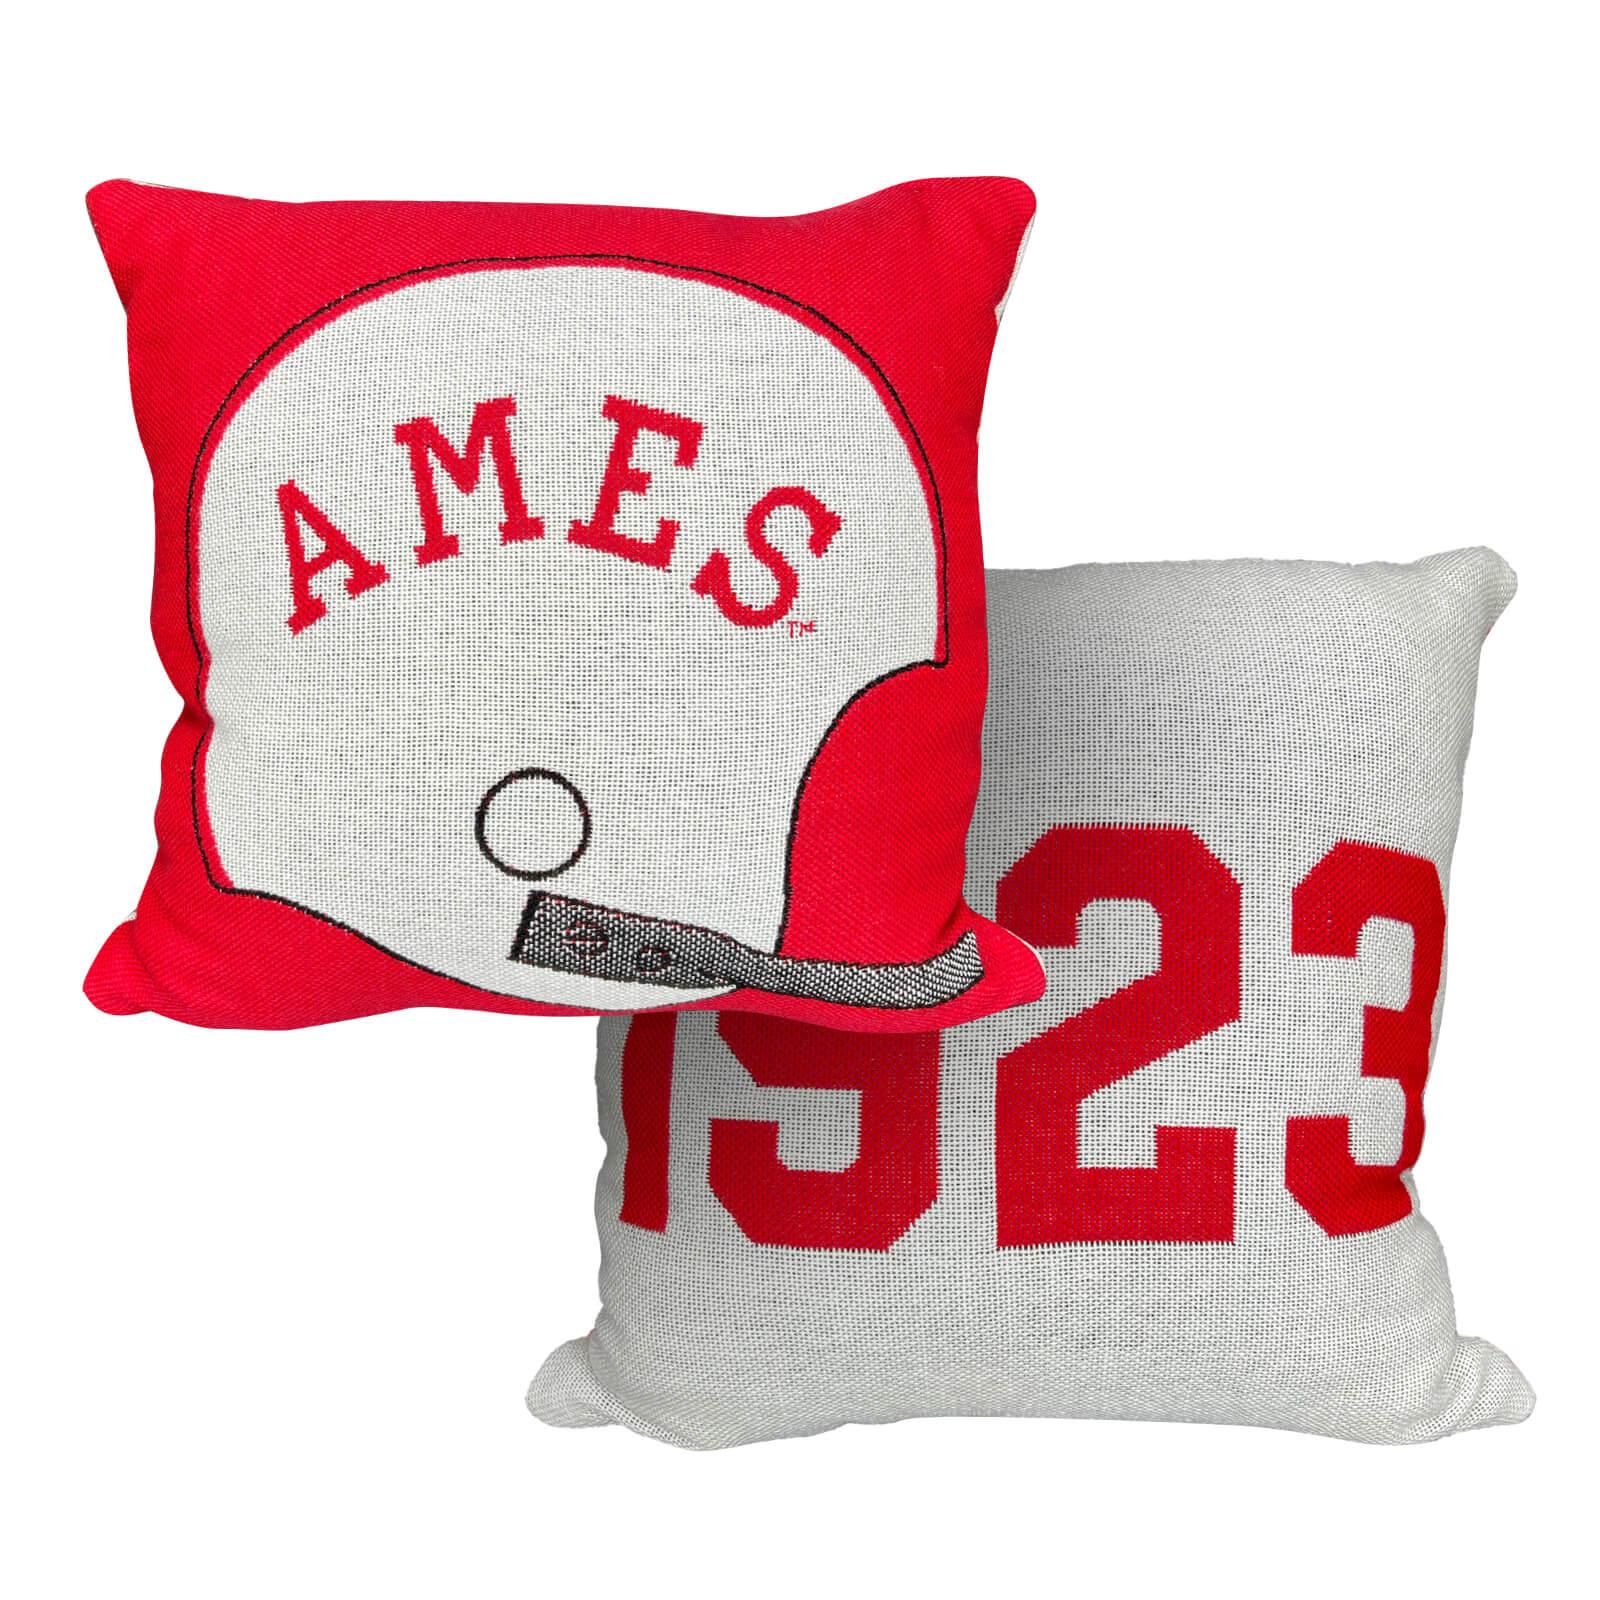 Ames Helmet 2-Sided Cardinal & Gray 20in x 20in Pillow